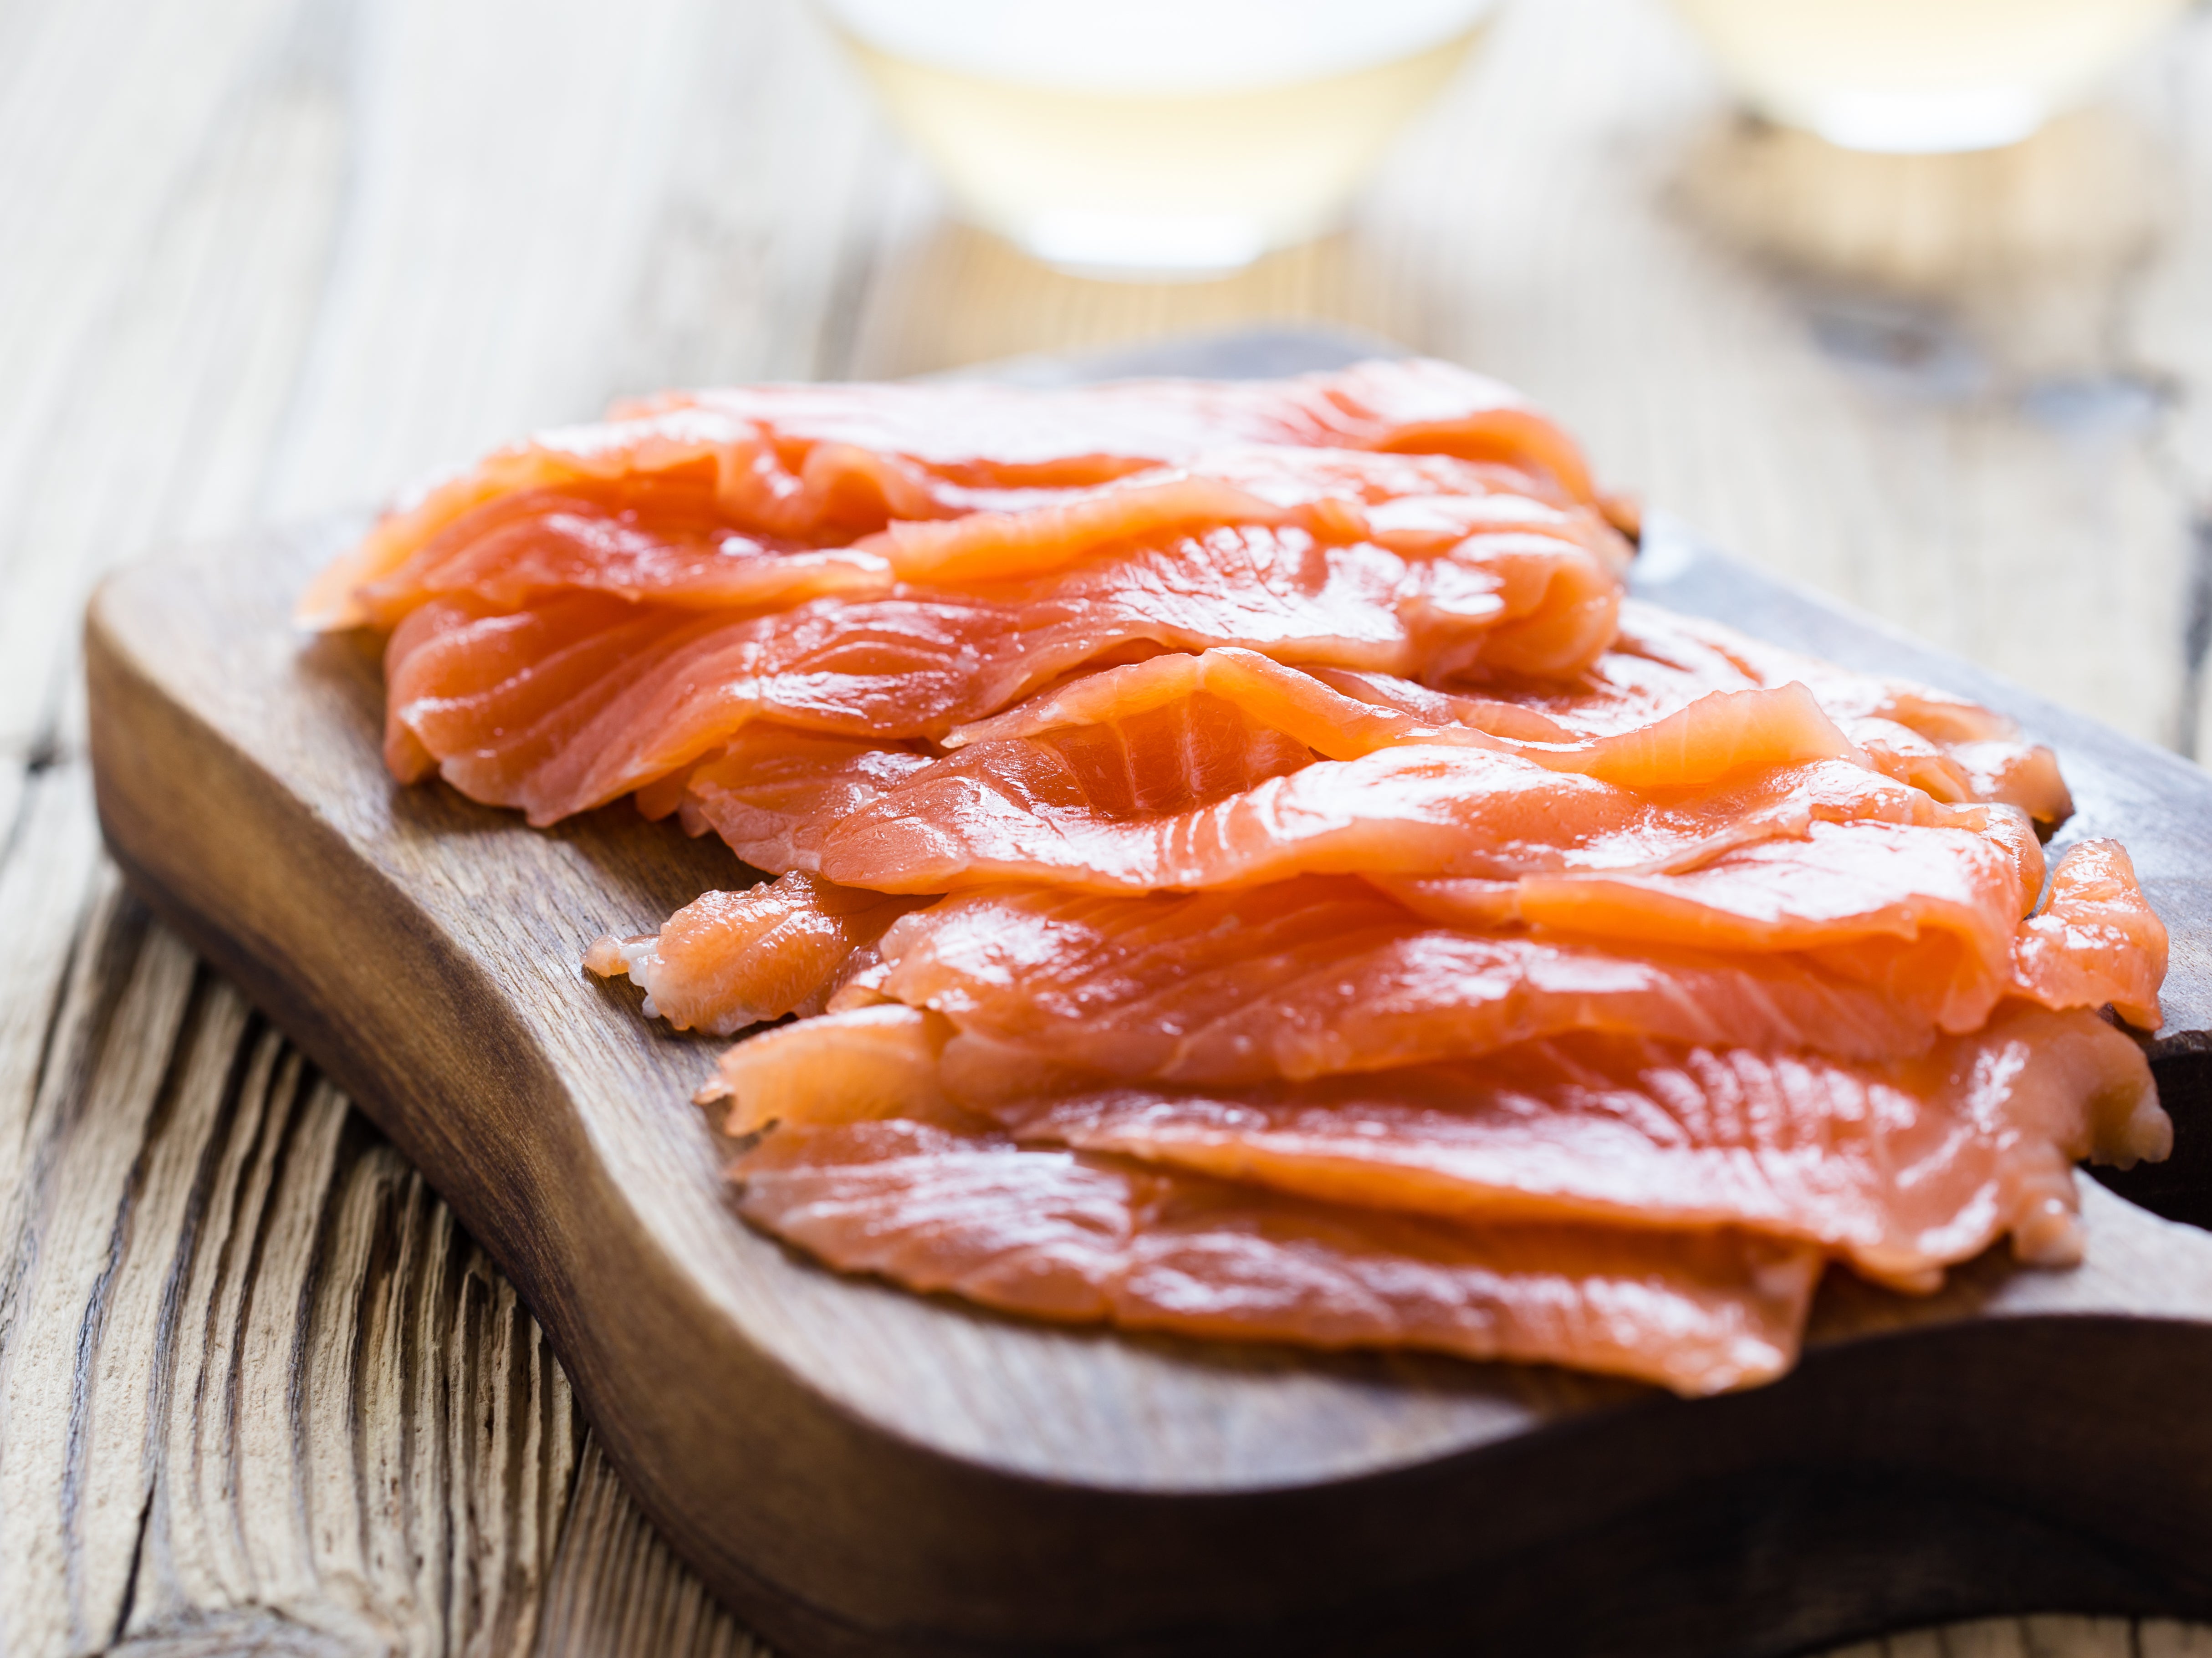 Public health authorities have issued a warning over smoked fish for those vulnerable to listeriosis